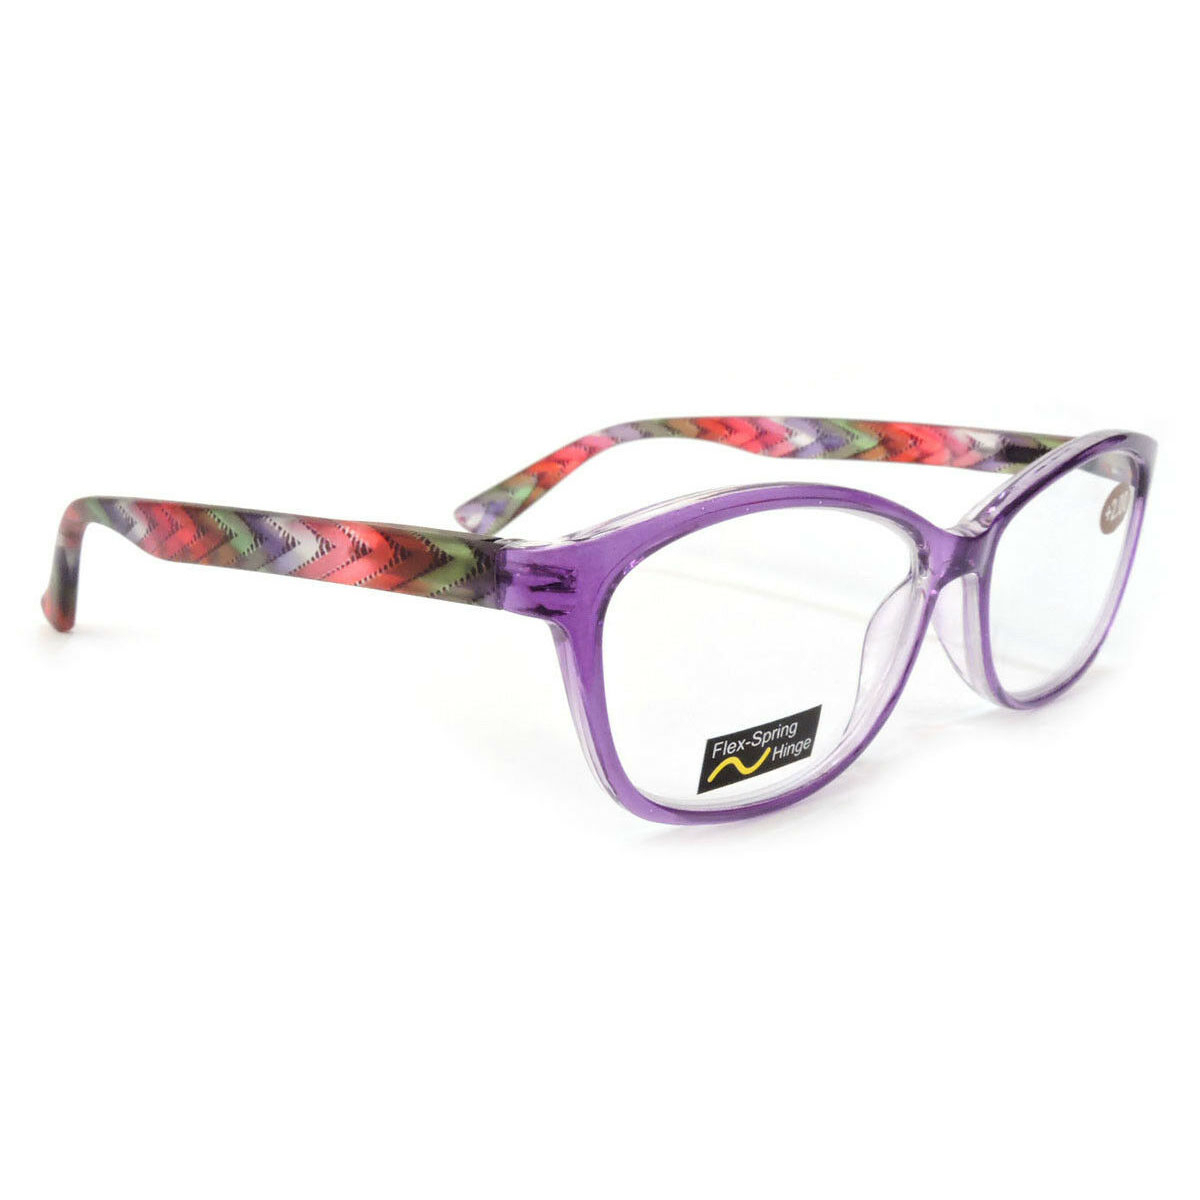 Classic Frame Reading Glasses Colorful Arms Retro Vintage Style - Purple, +1.75